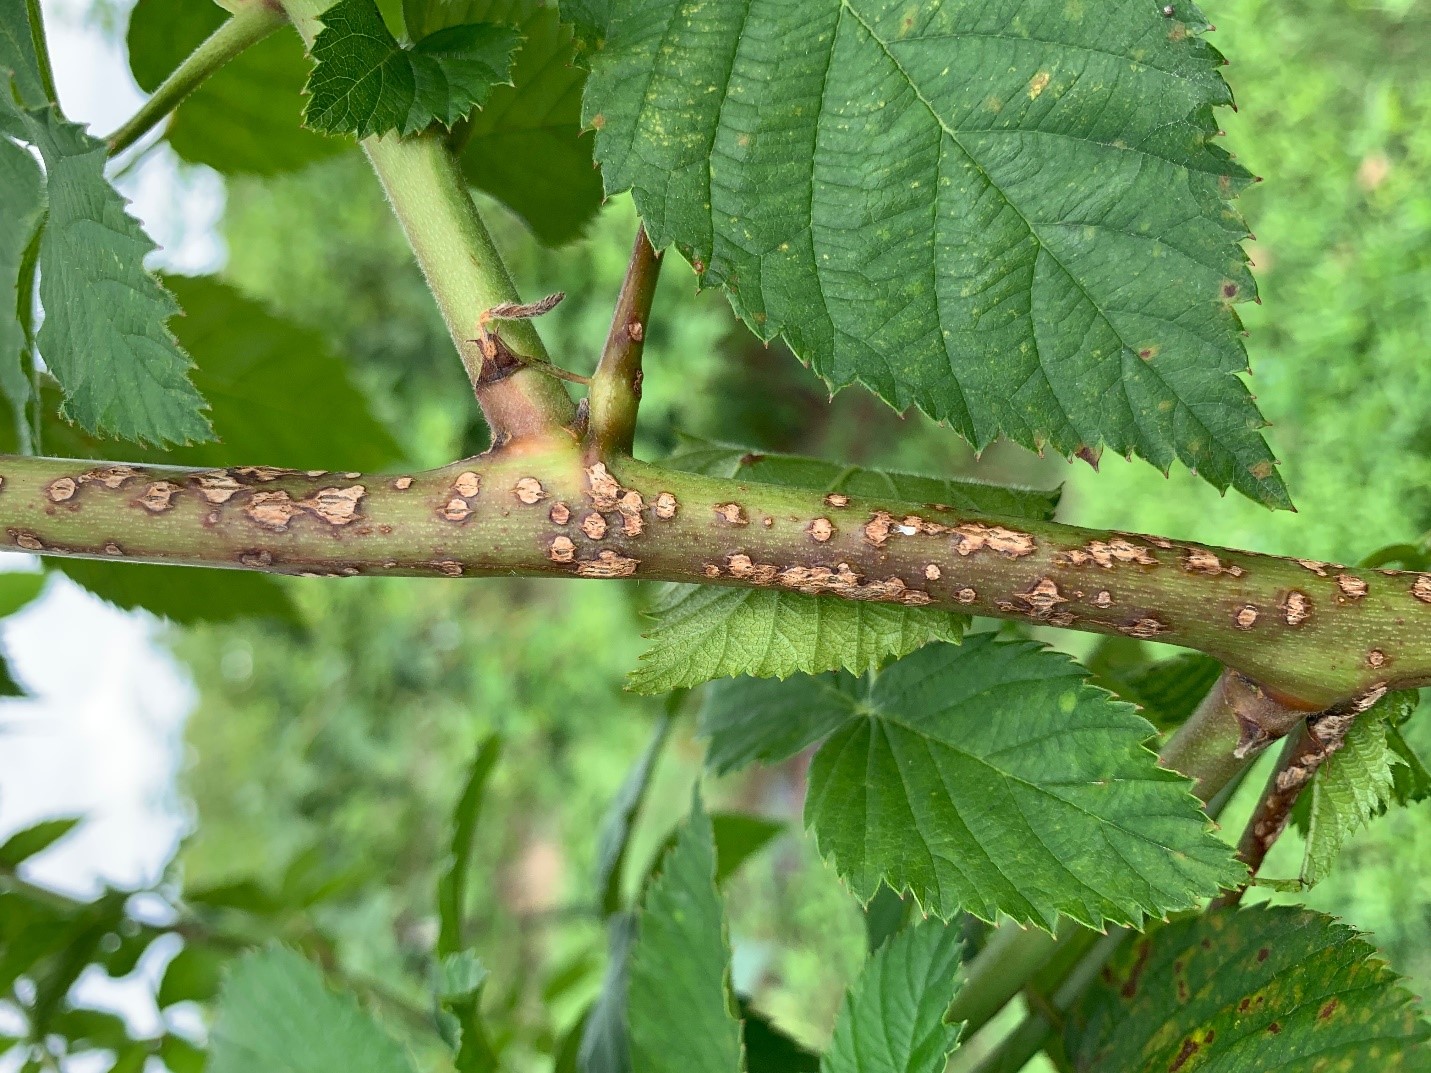 Blackberry stem with anthracnose lesion